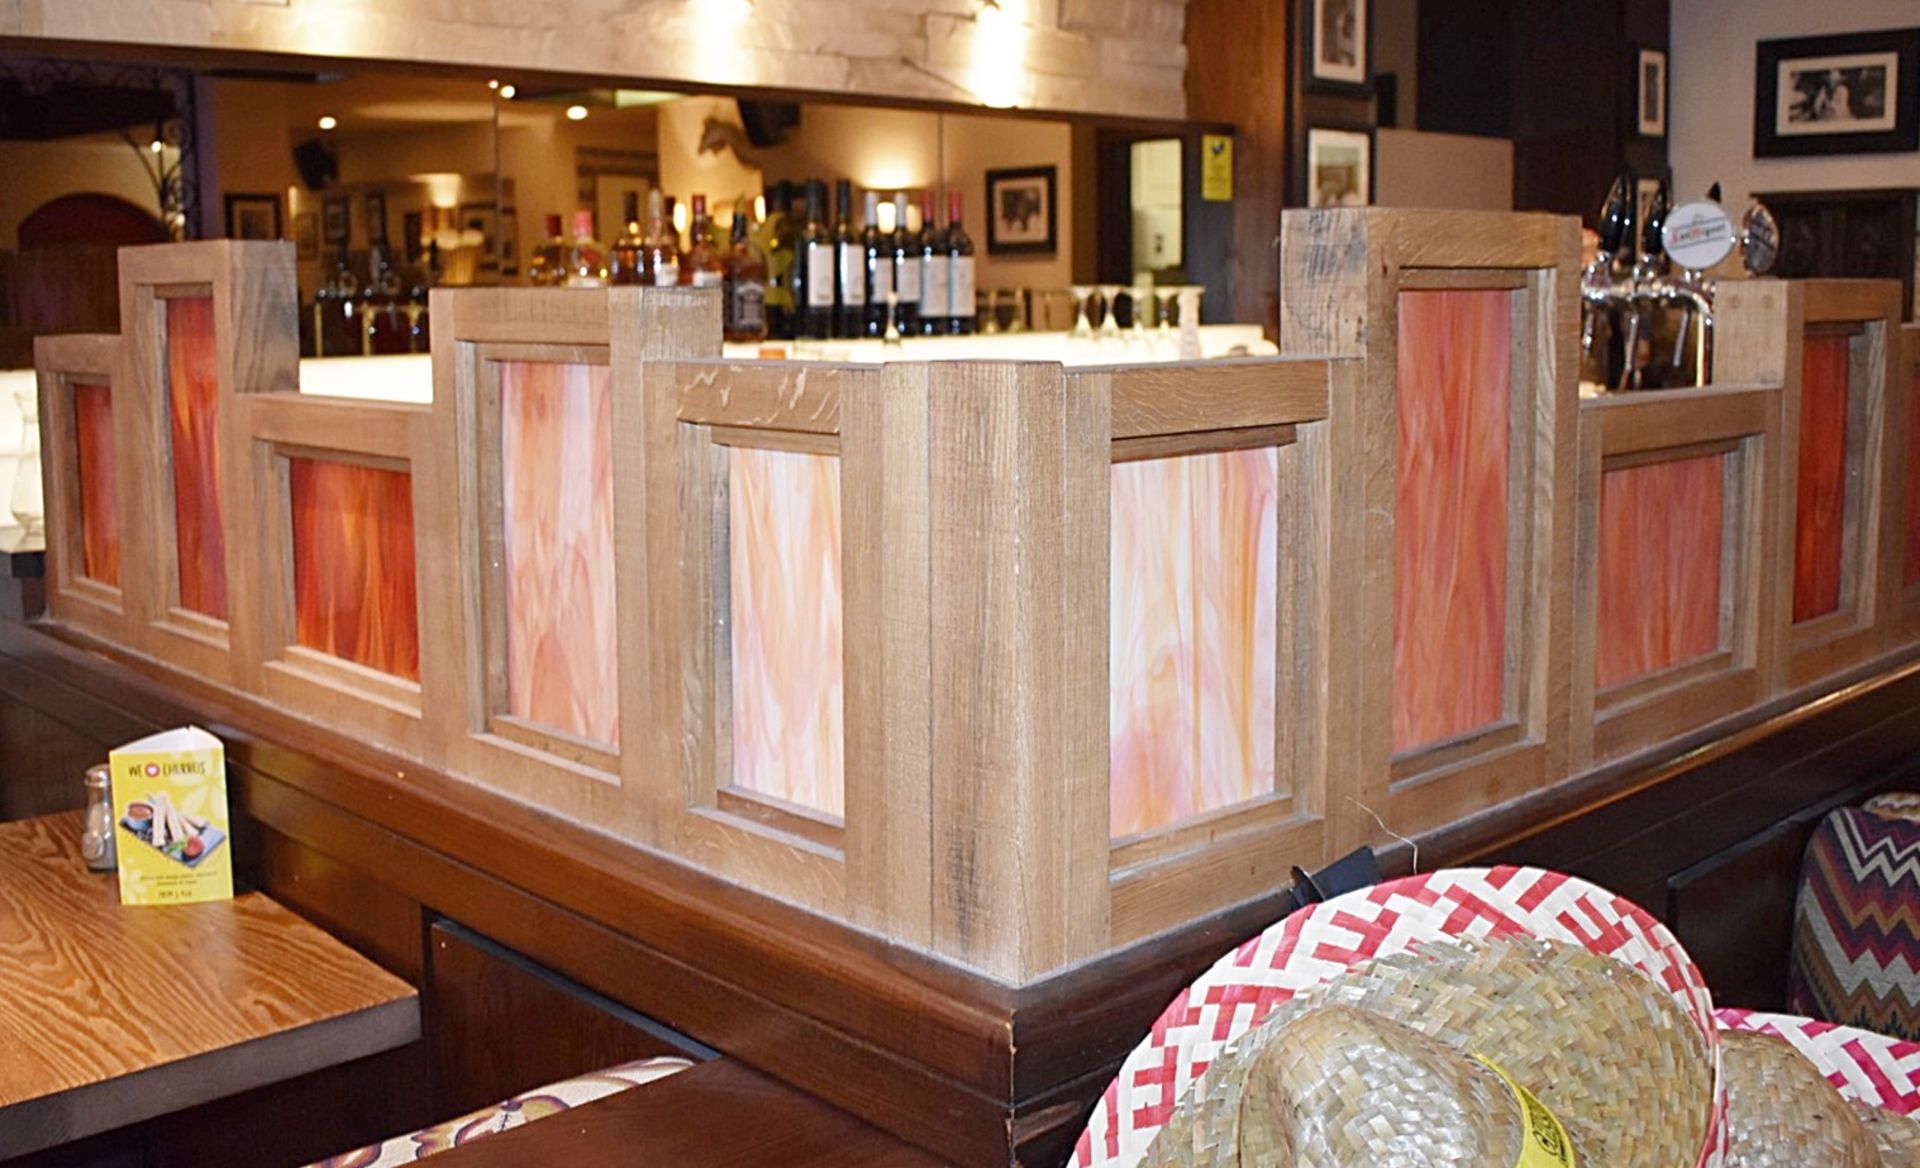 1 x L-Shaped Privacy Divider Featuring Rustic Wooden Framing And Coloured Inlays - Image 6 of 9